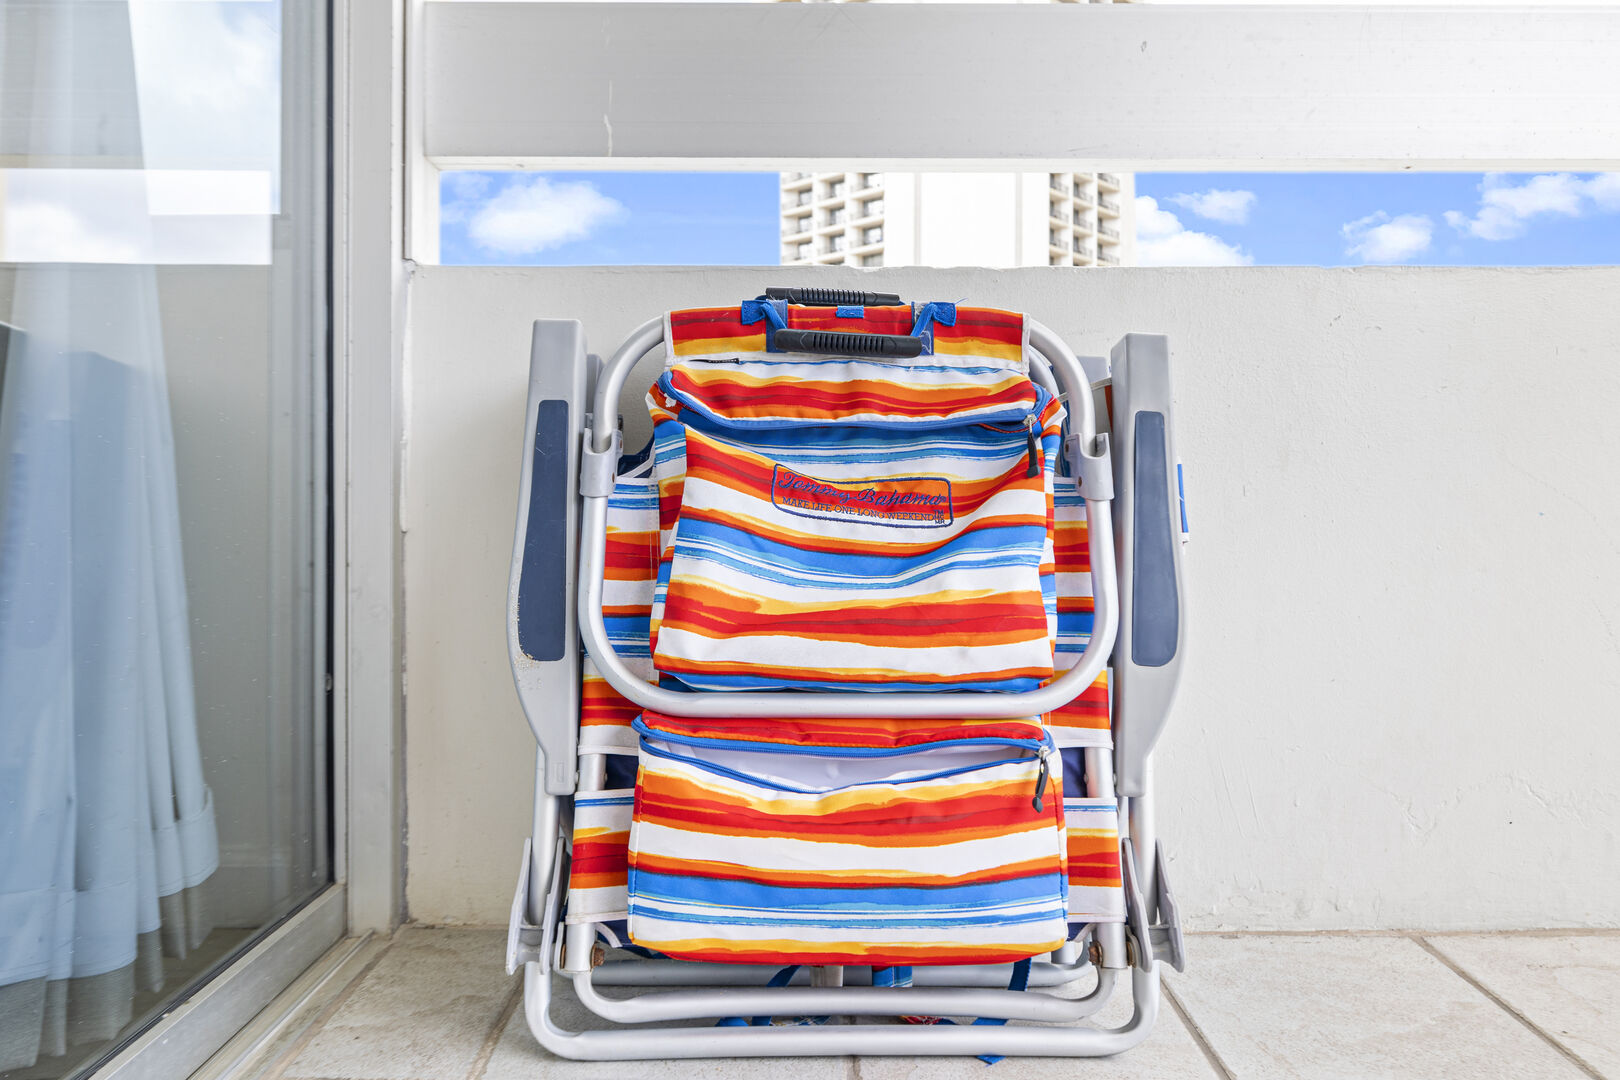 We provide 2 beach chairs for the guests to use!